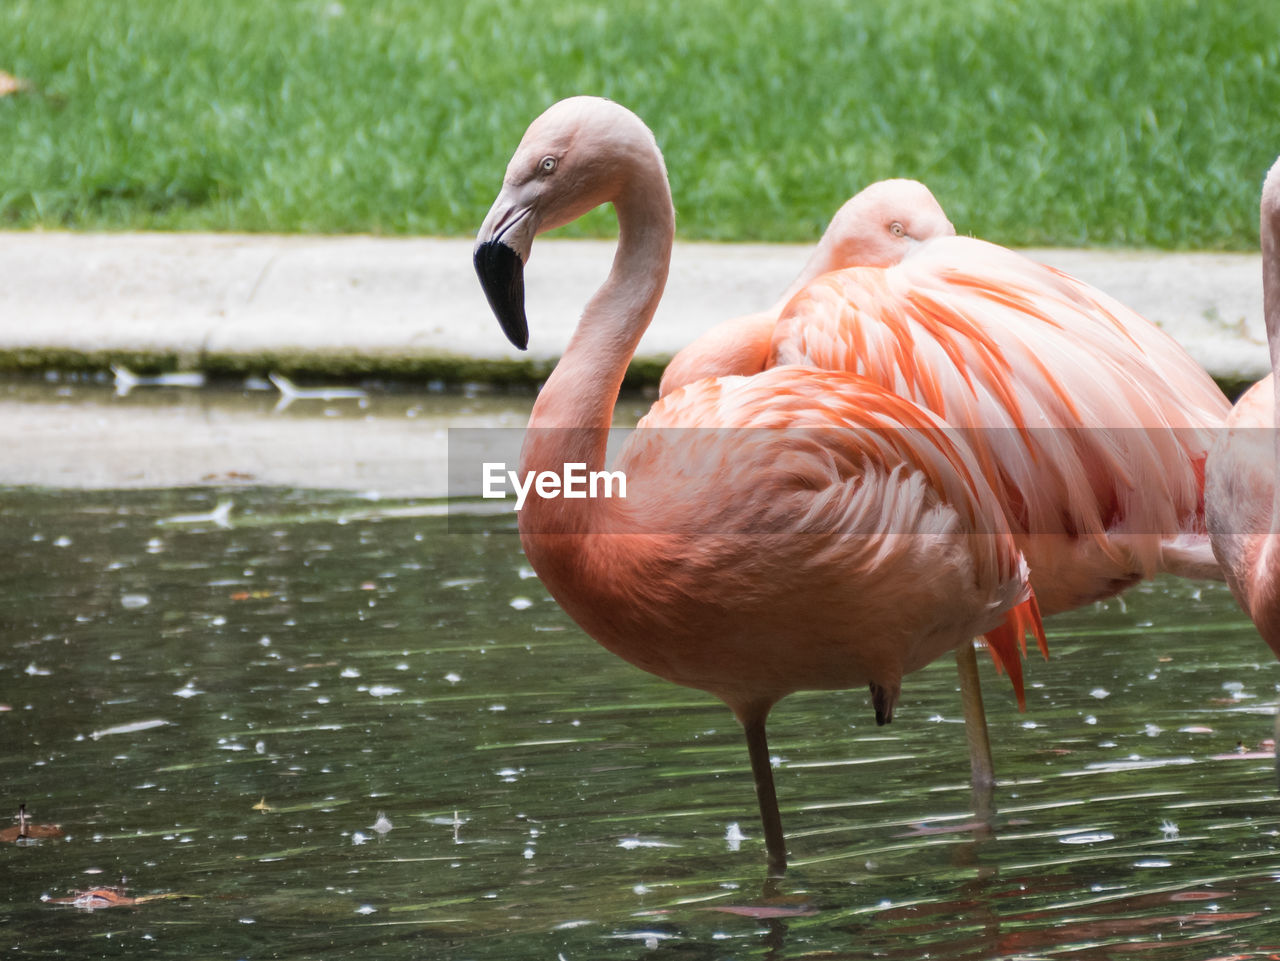 Greater flamingo drinking water in lake